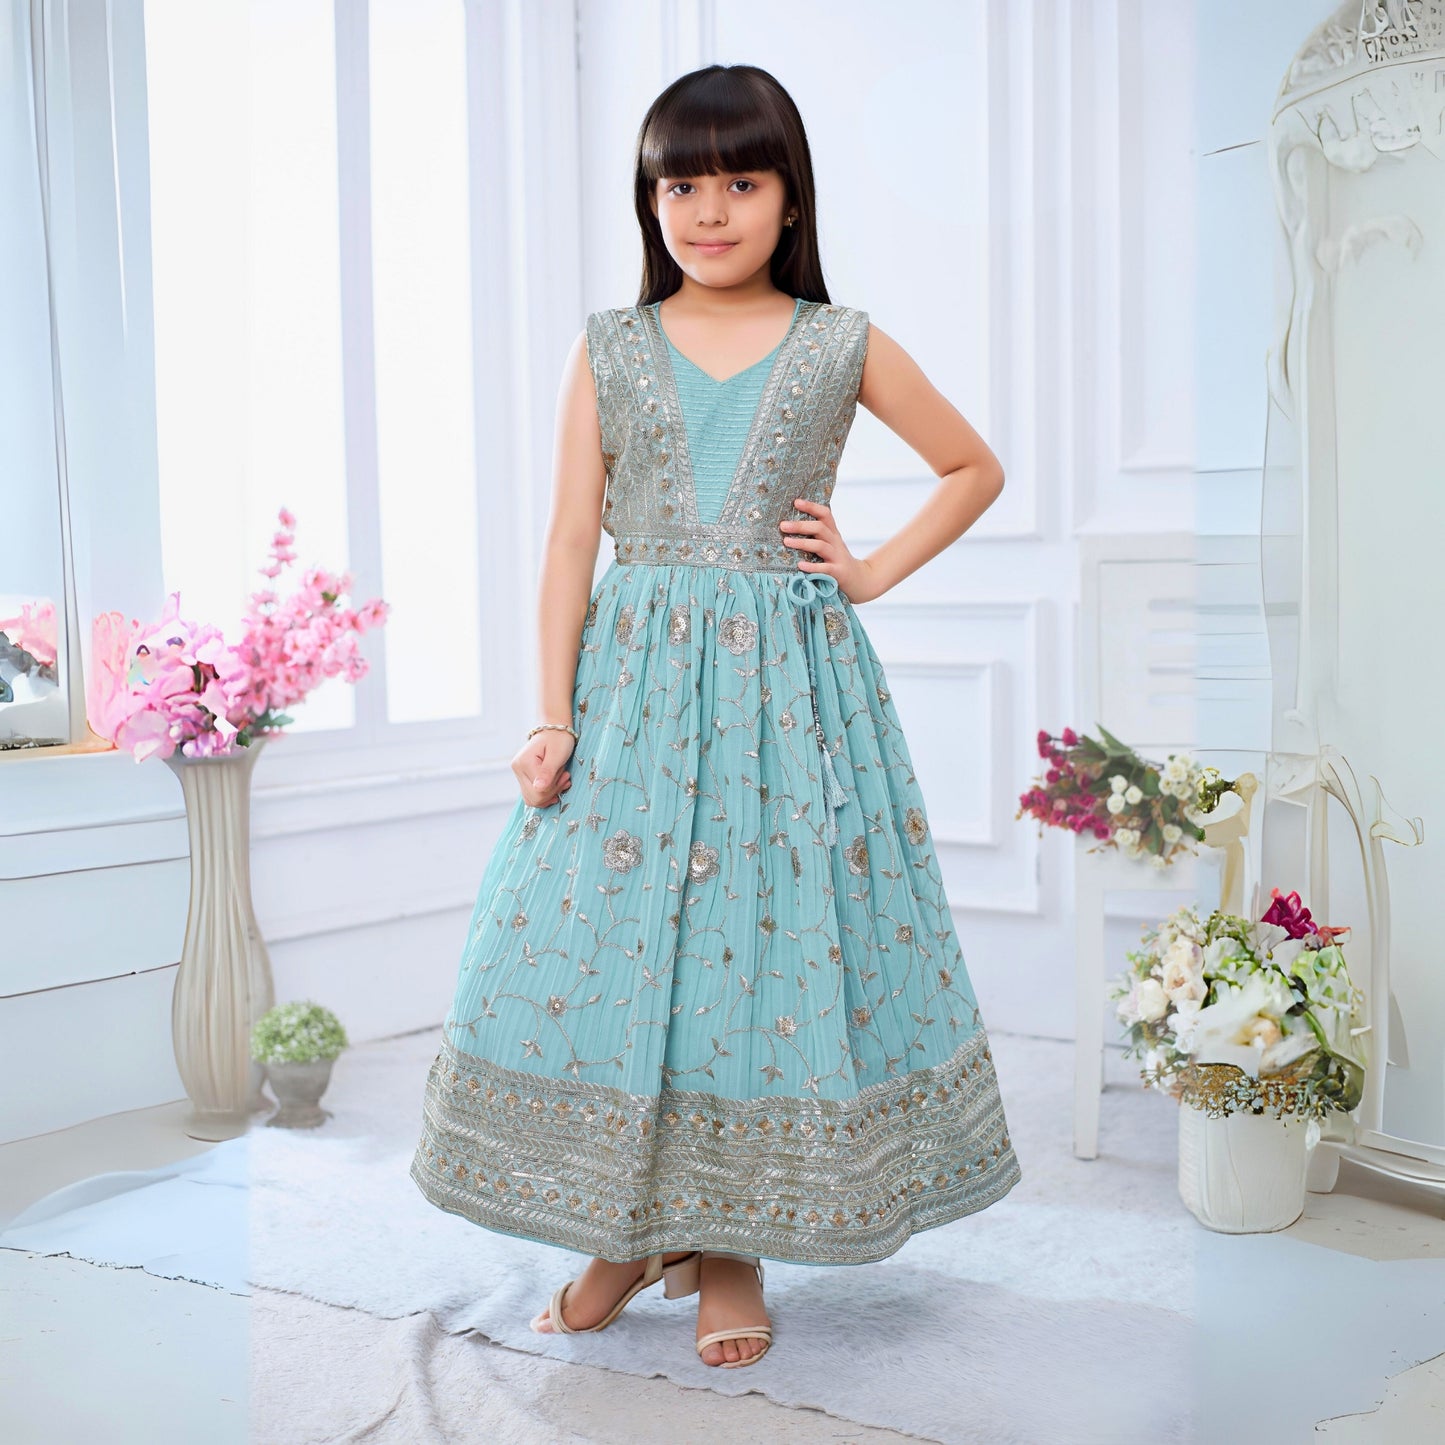 Pastel Blue Ethnic Dress With Beautiful Glowing Ivory Design